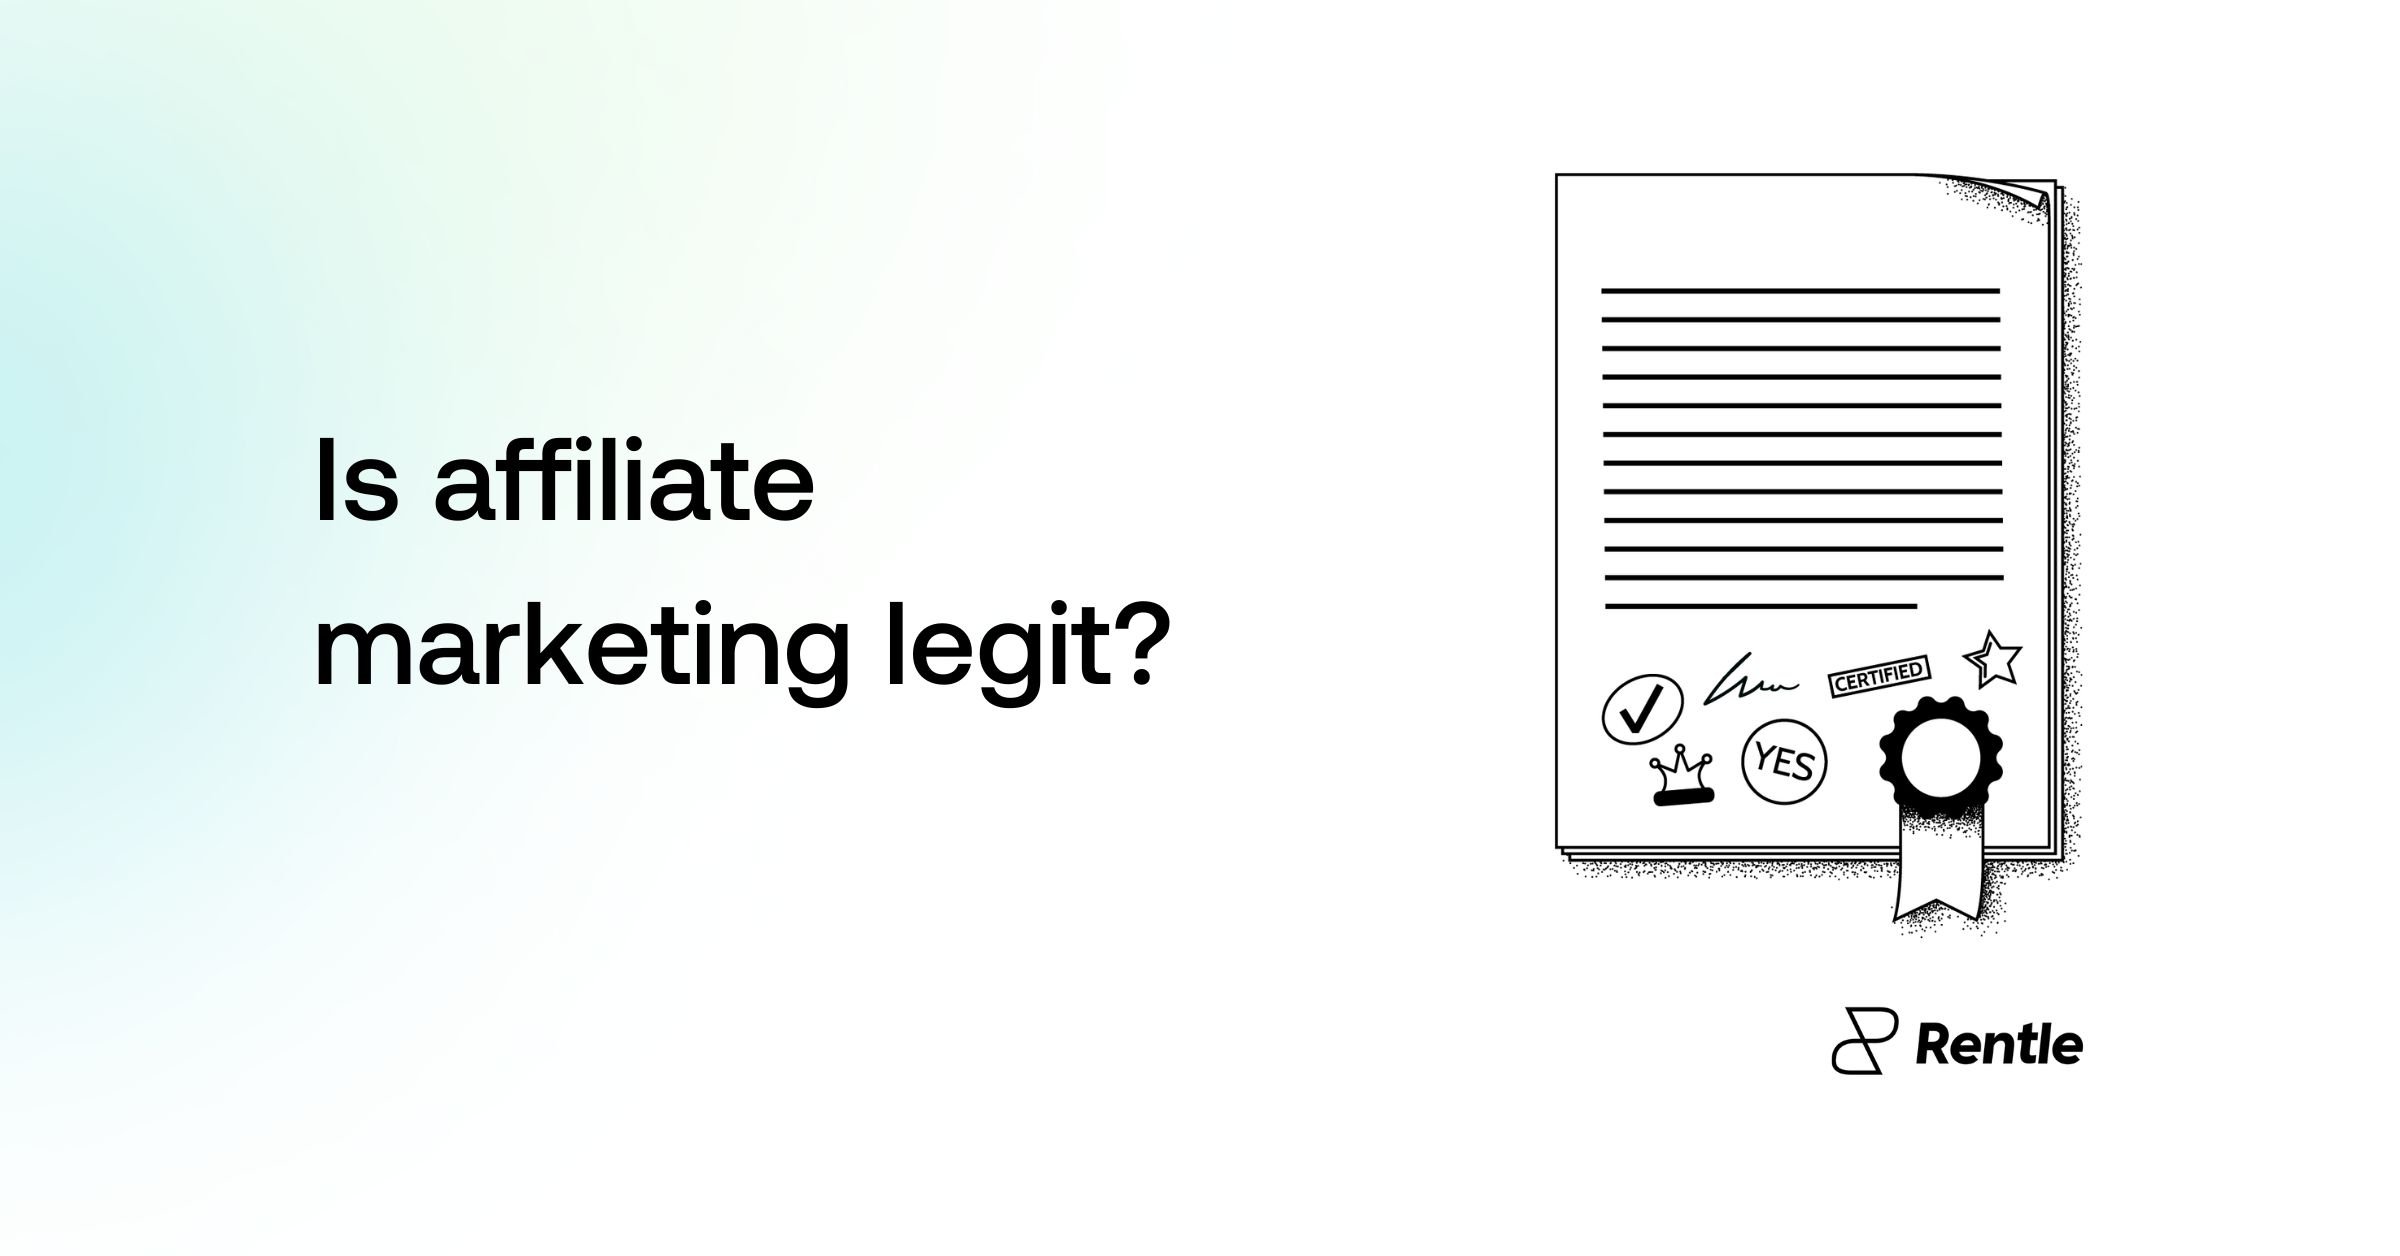 is affiliate marketing legit? -text next to a certificate illustration